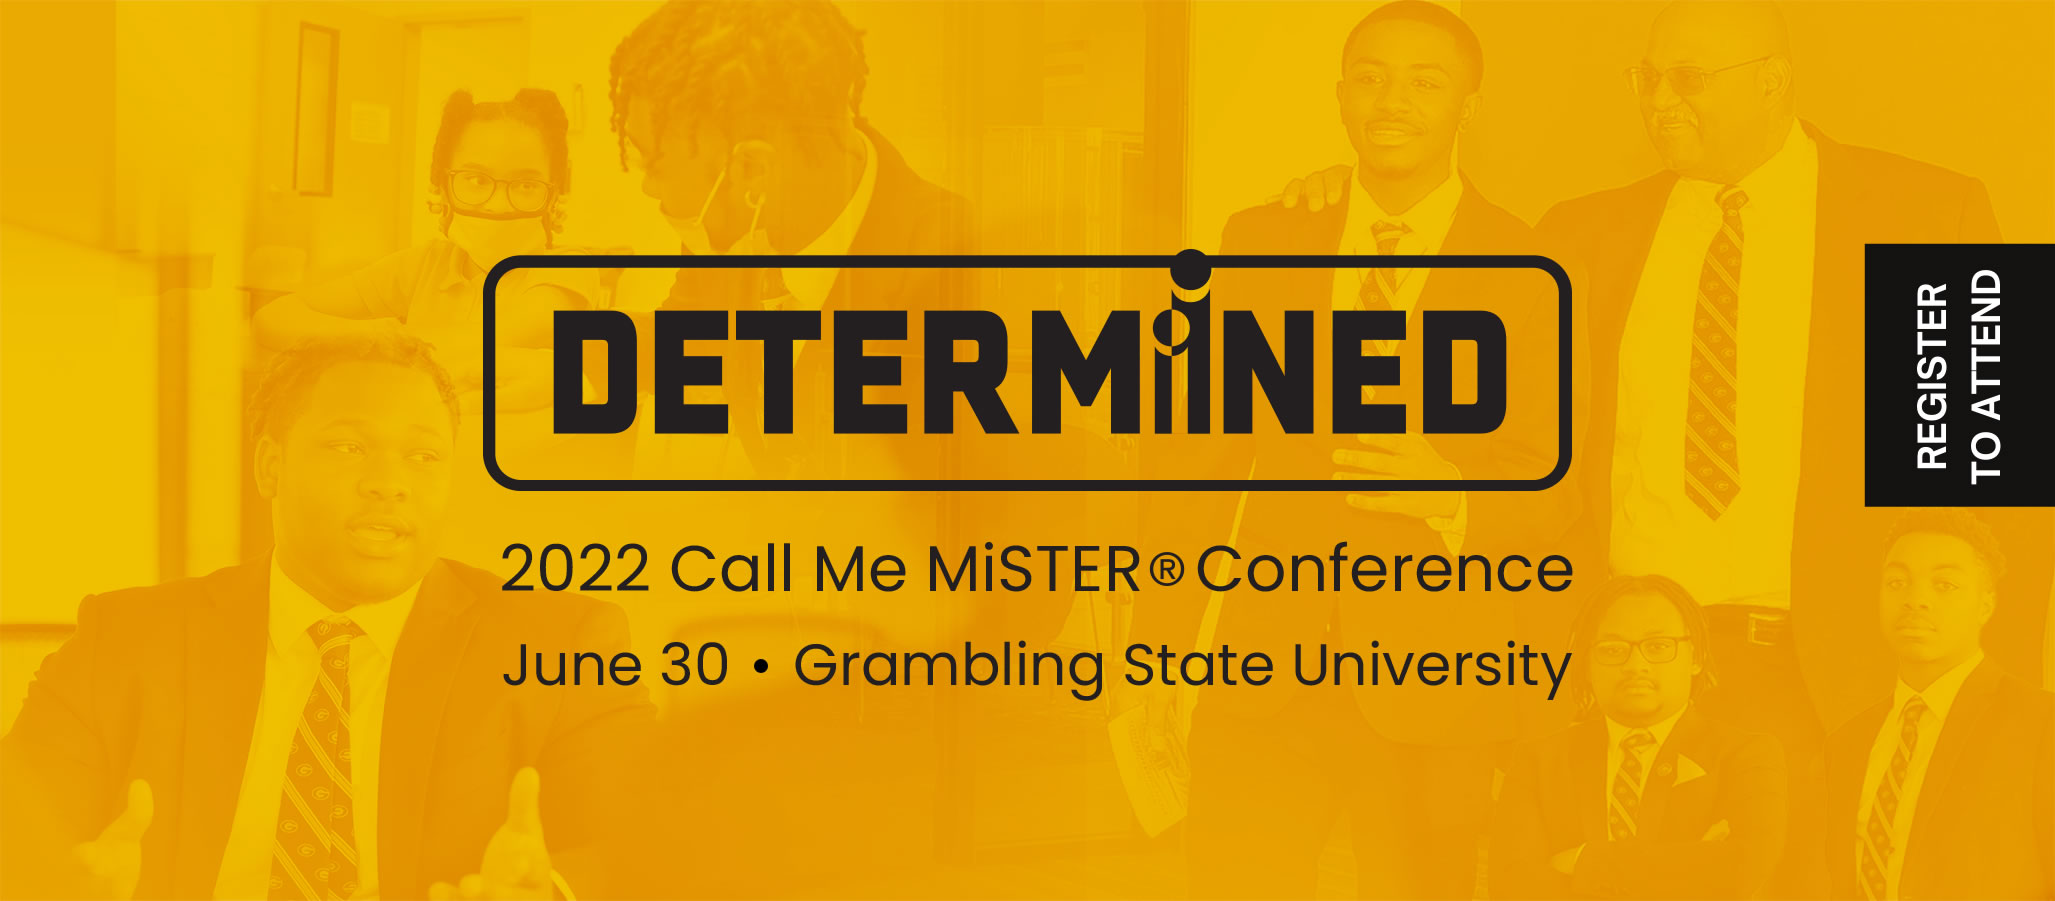 Determined - 2022 Call Me MiSTER Conference. June 30, Grambling State University - Register to Attend